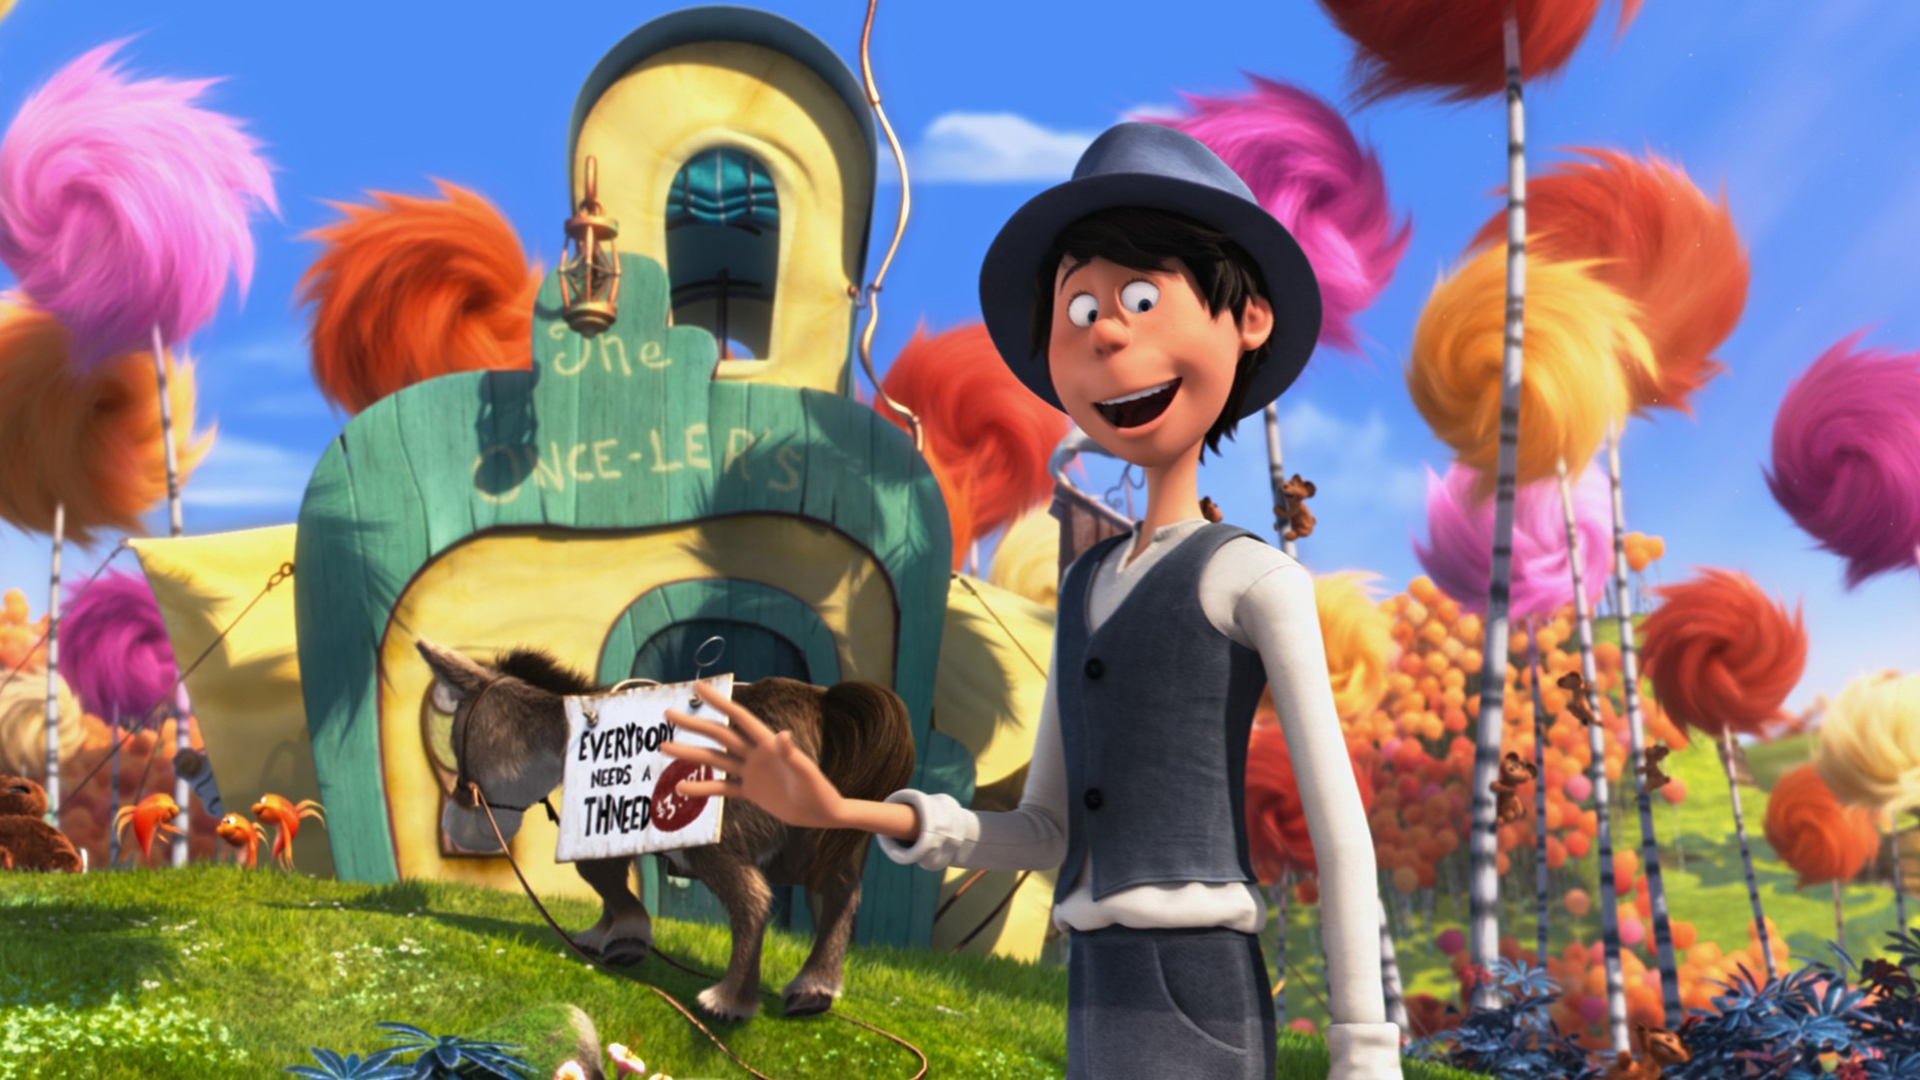 The Lorax The Once Ler 1920x1080